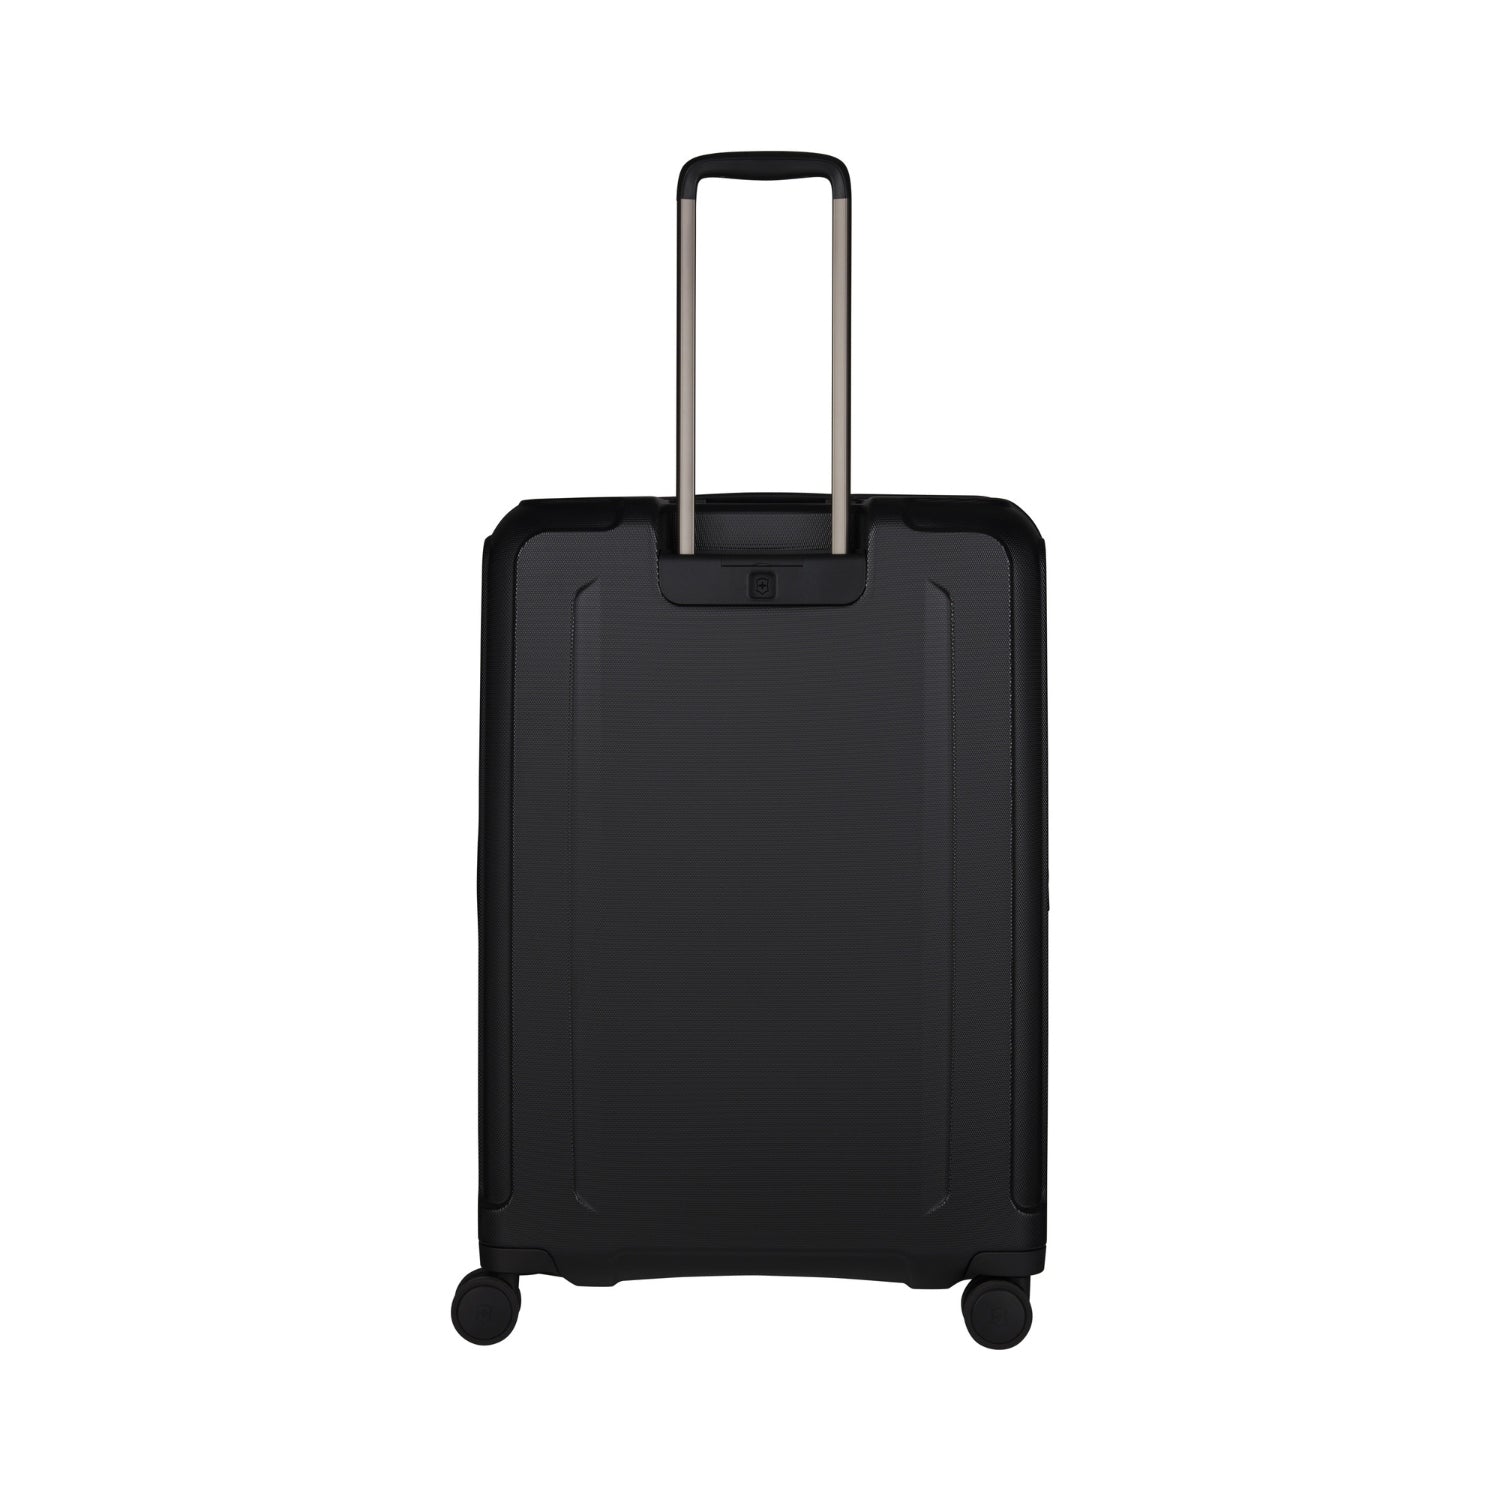 Victorinox Werks Traveler 6.0 74cm Hardcase Expandable 4 Double Wheel Check-In Luggage Trolley Black - 609972